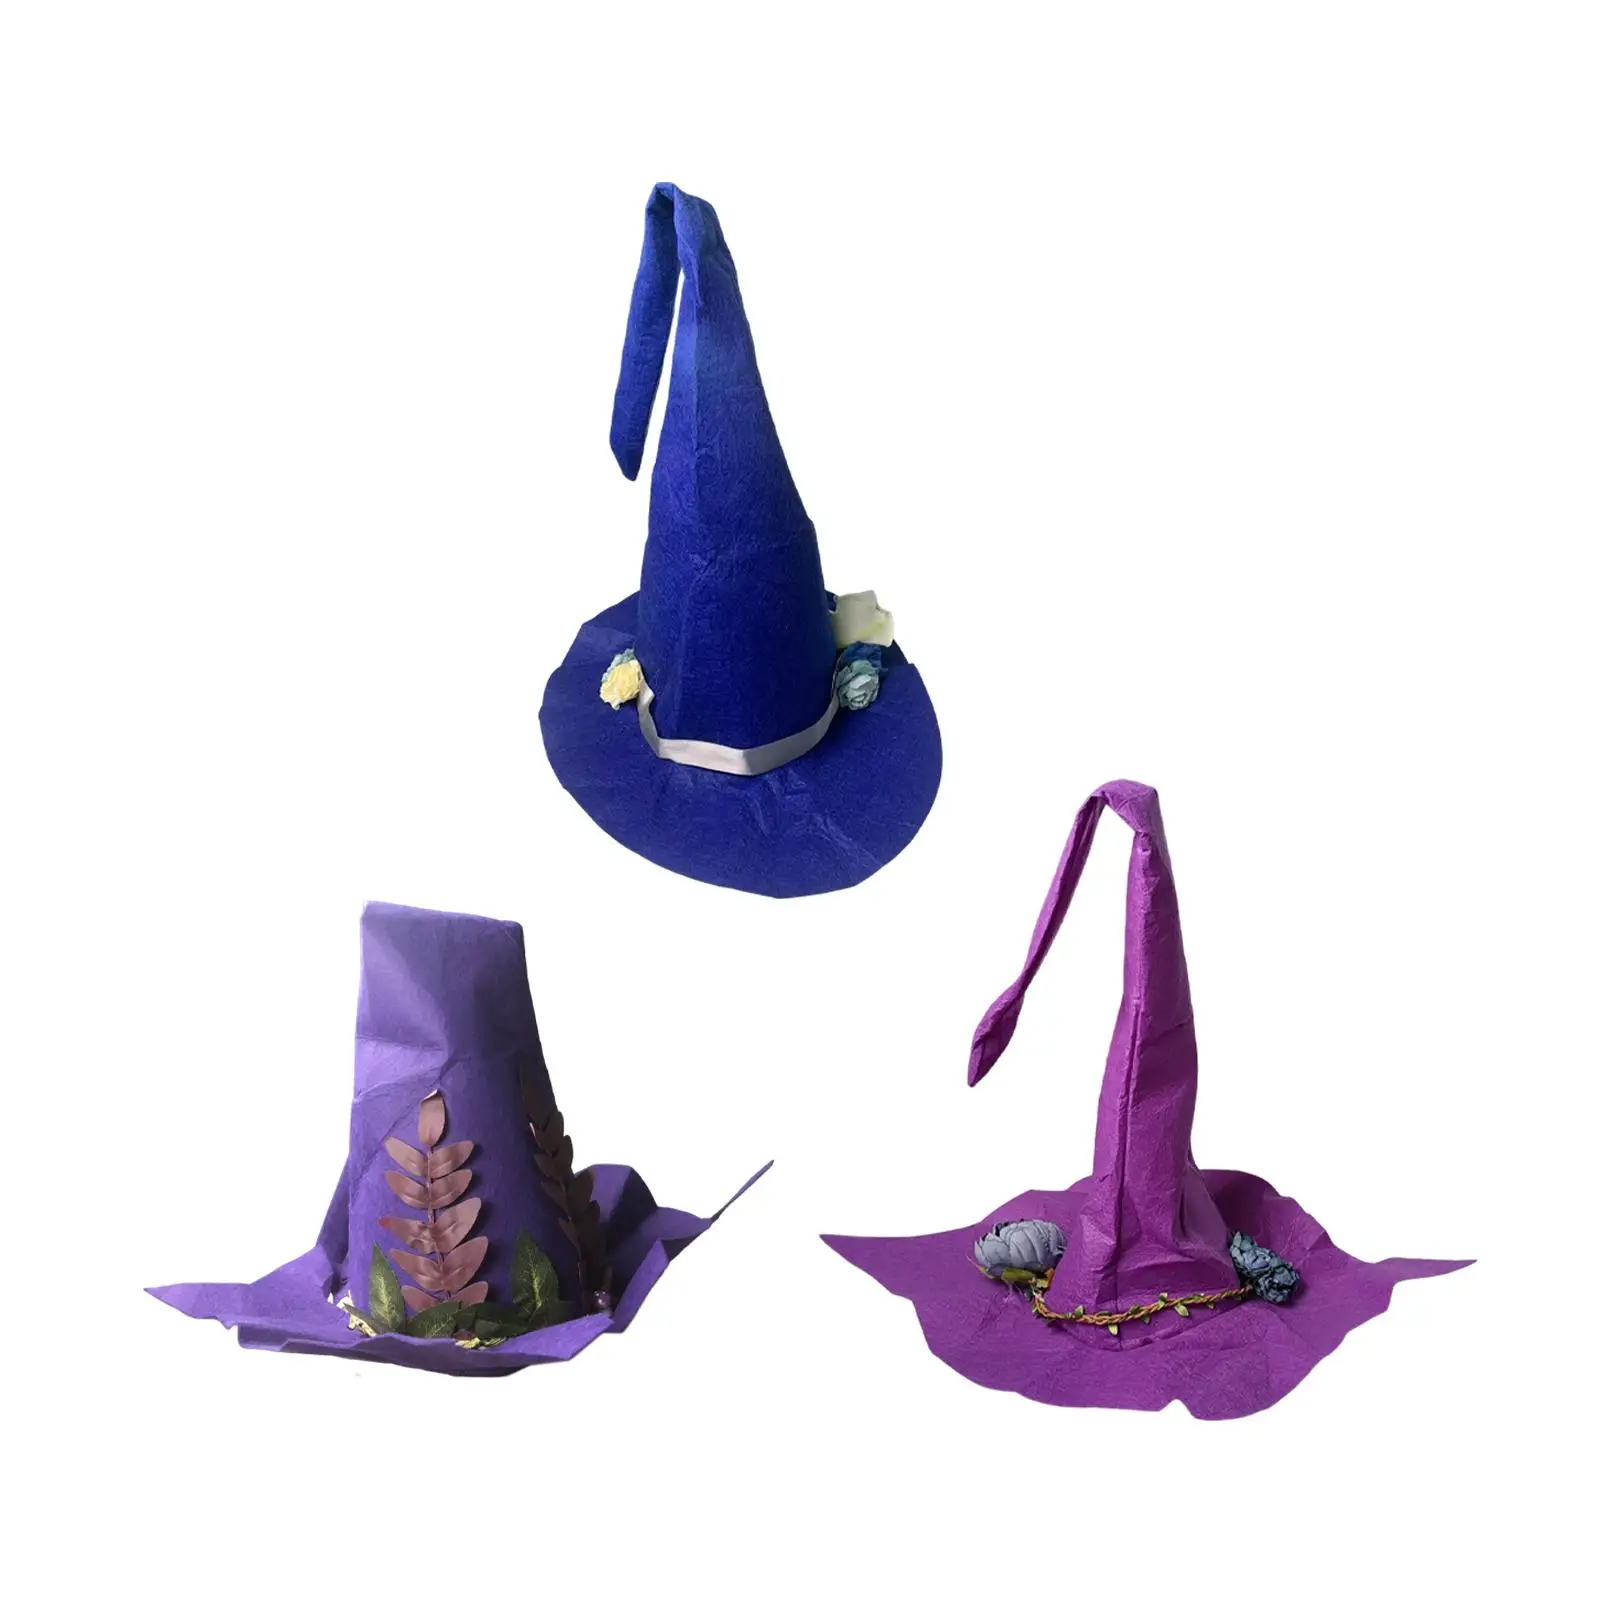 

Halloween Felt Witch Hats Cosplay Wizard Caps for Women Girls Top Pointed Caps for Fancy Dress Festival Masquerade Holiday Party